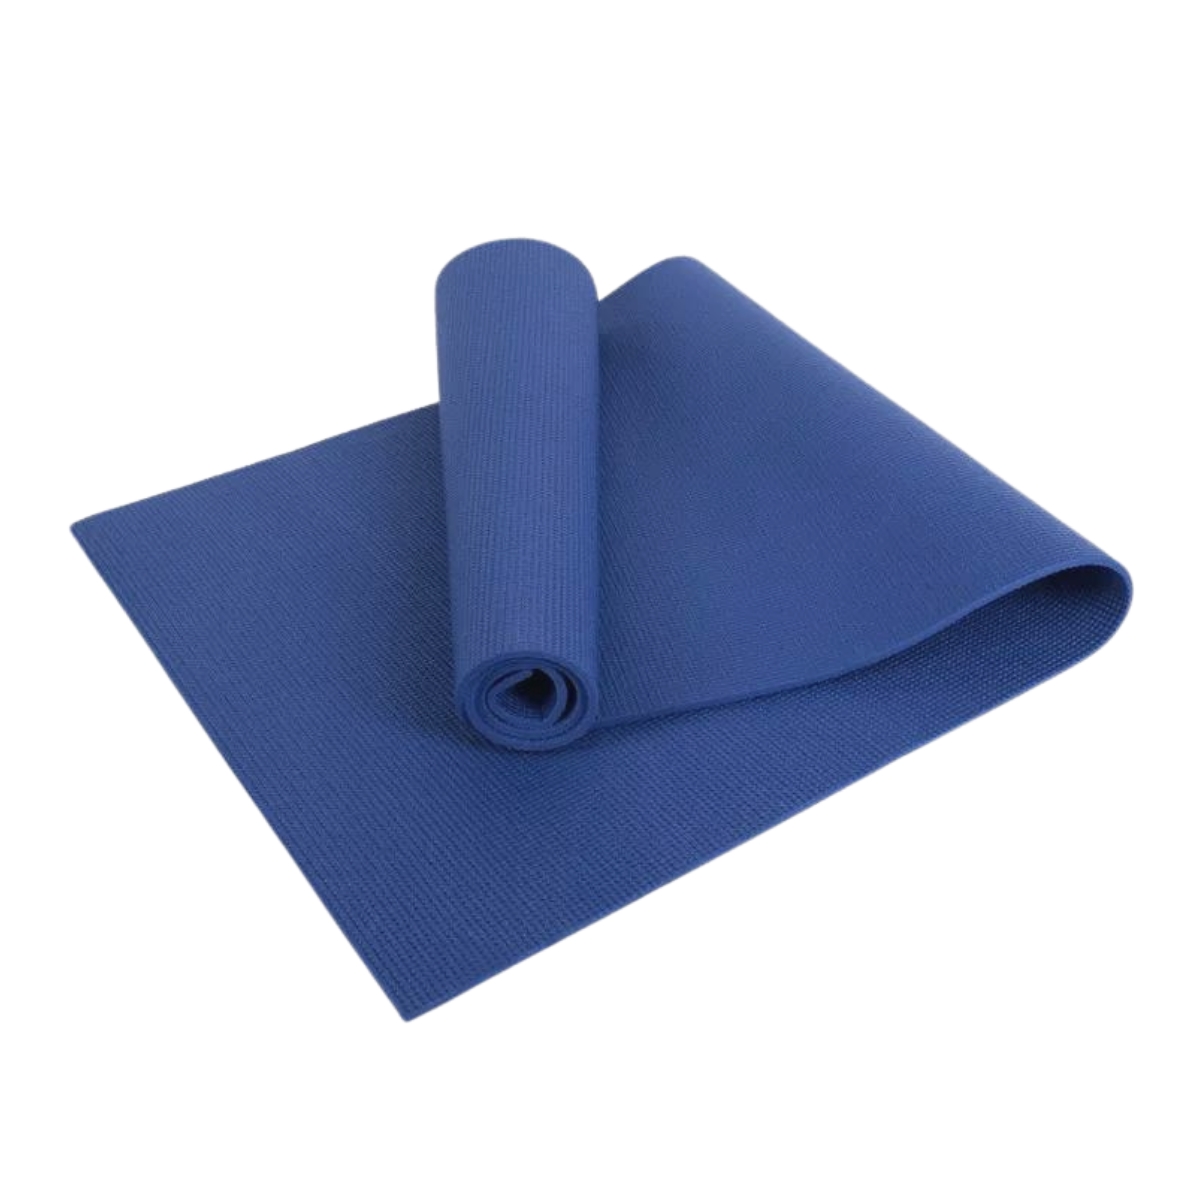 Picture of JupiterGear JG-YOGAMAT2-BLUE Performance Yoga Mat with Carrying Straps